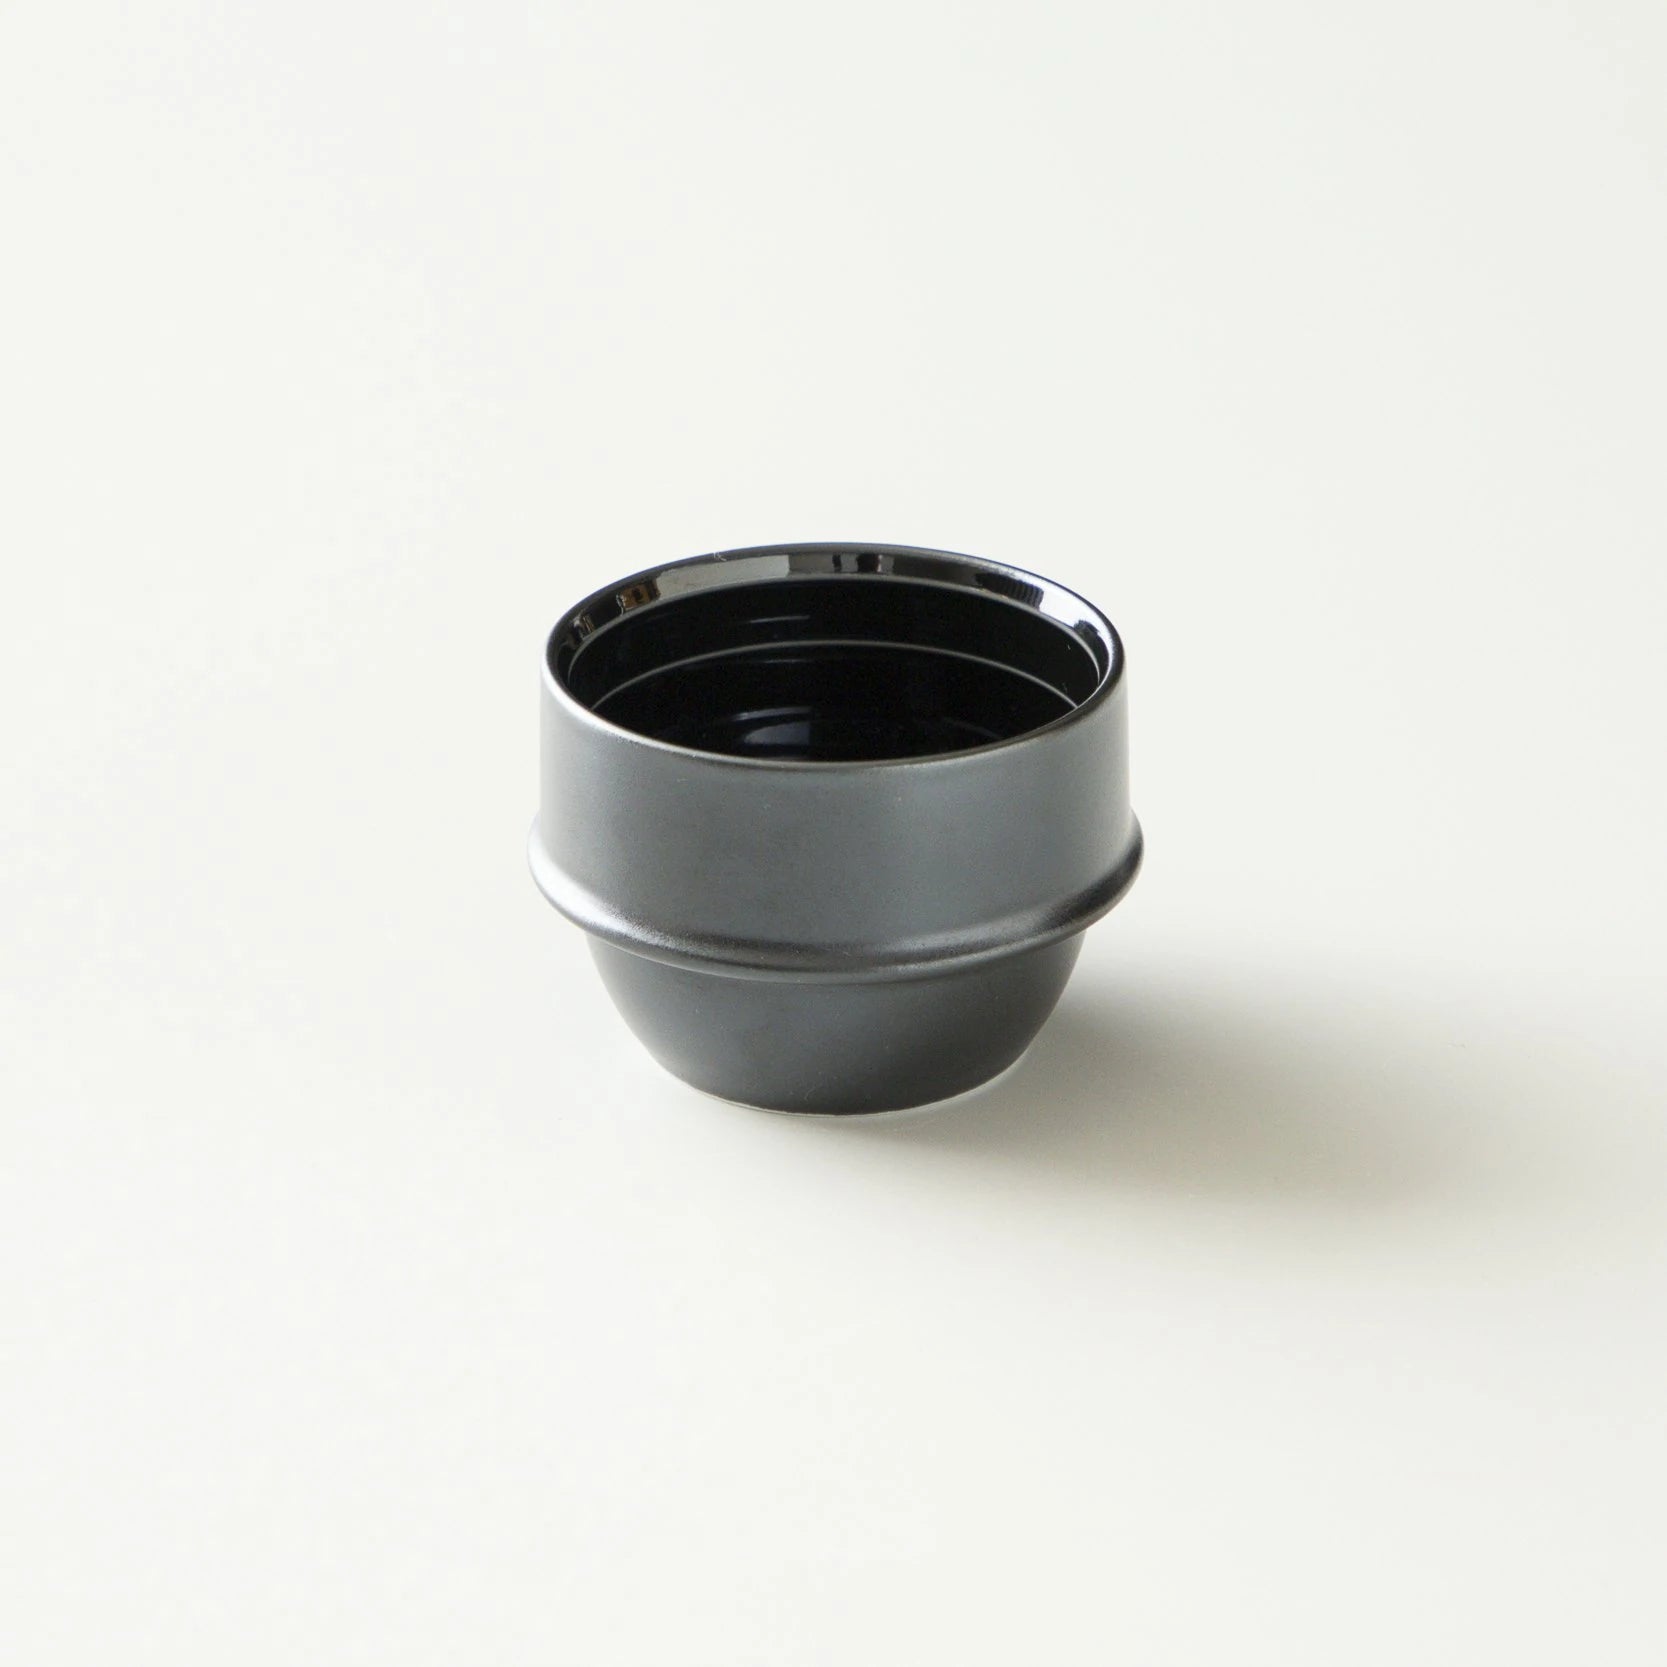 Origami Cupping Bowl in Black